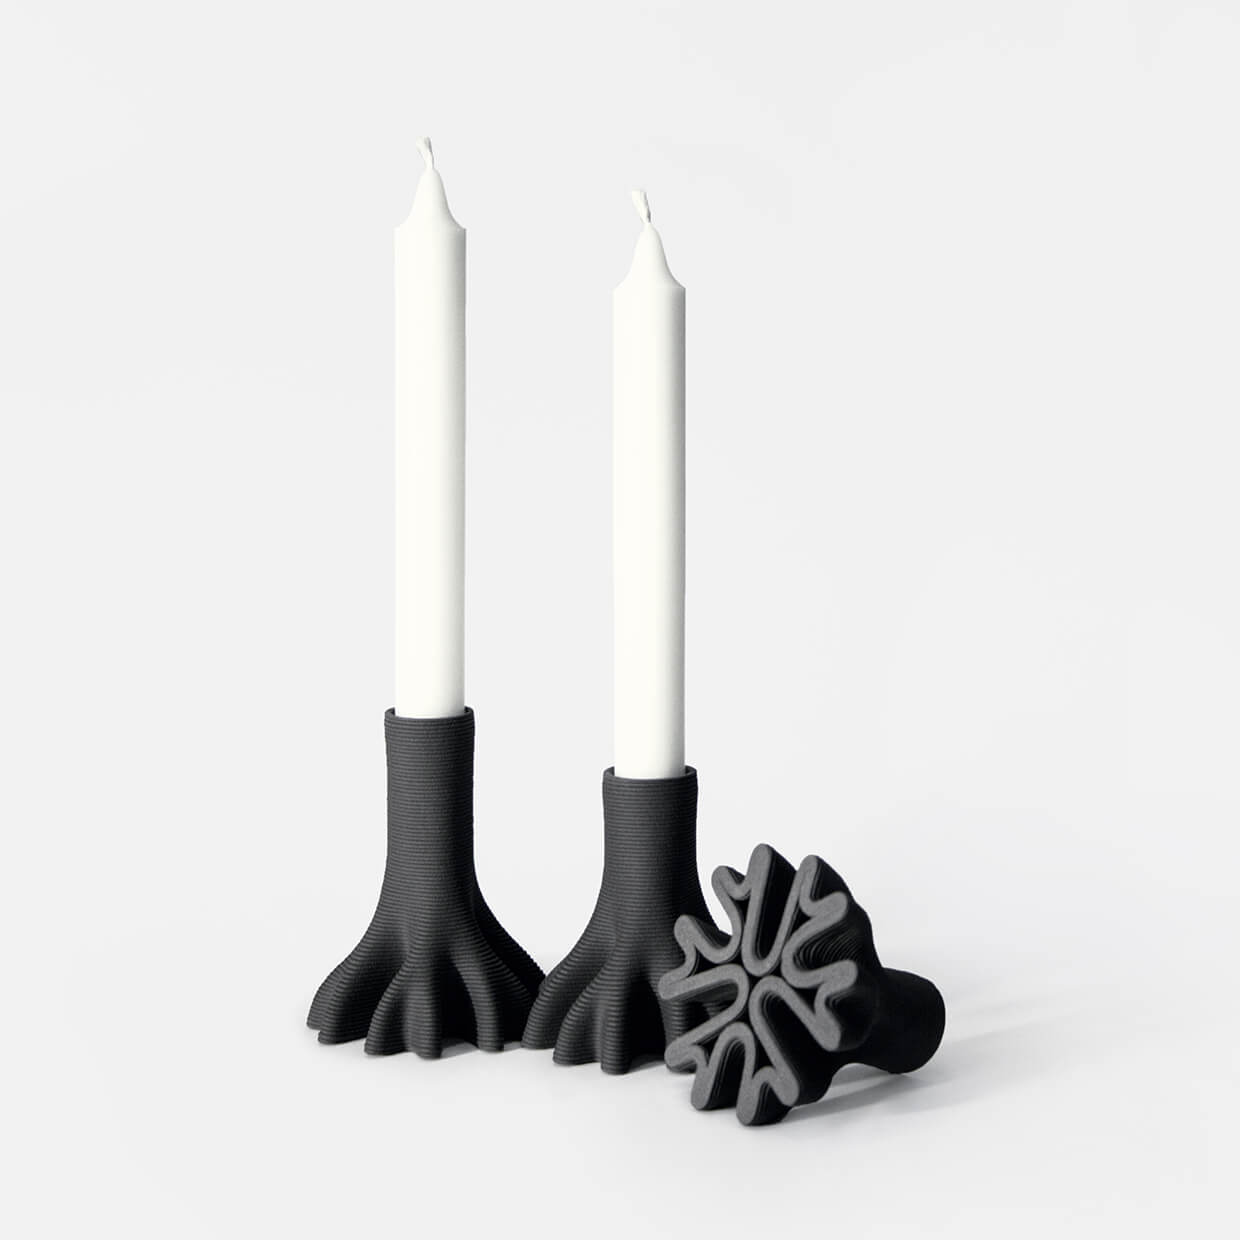 Set of 3 3D Printed Ceramic Candleholders holding candles. One of them is upside down to show the base